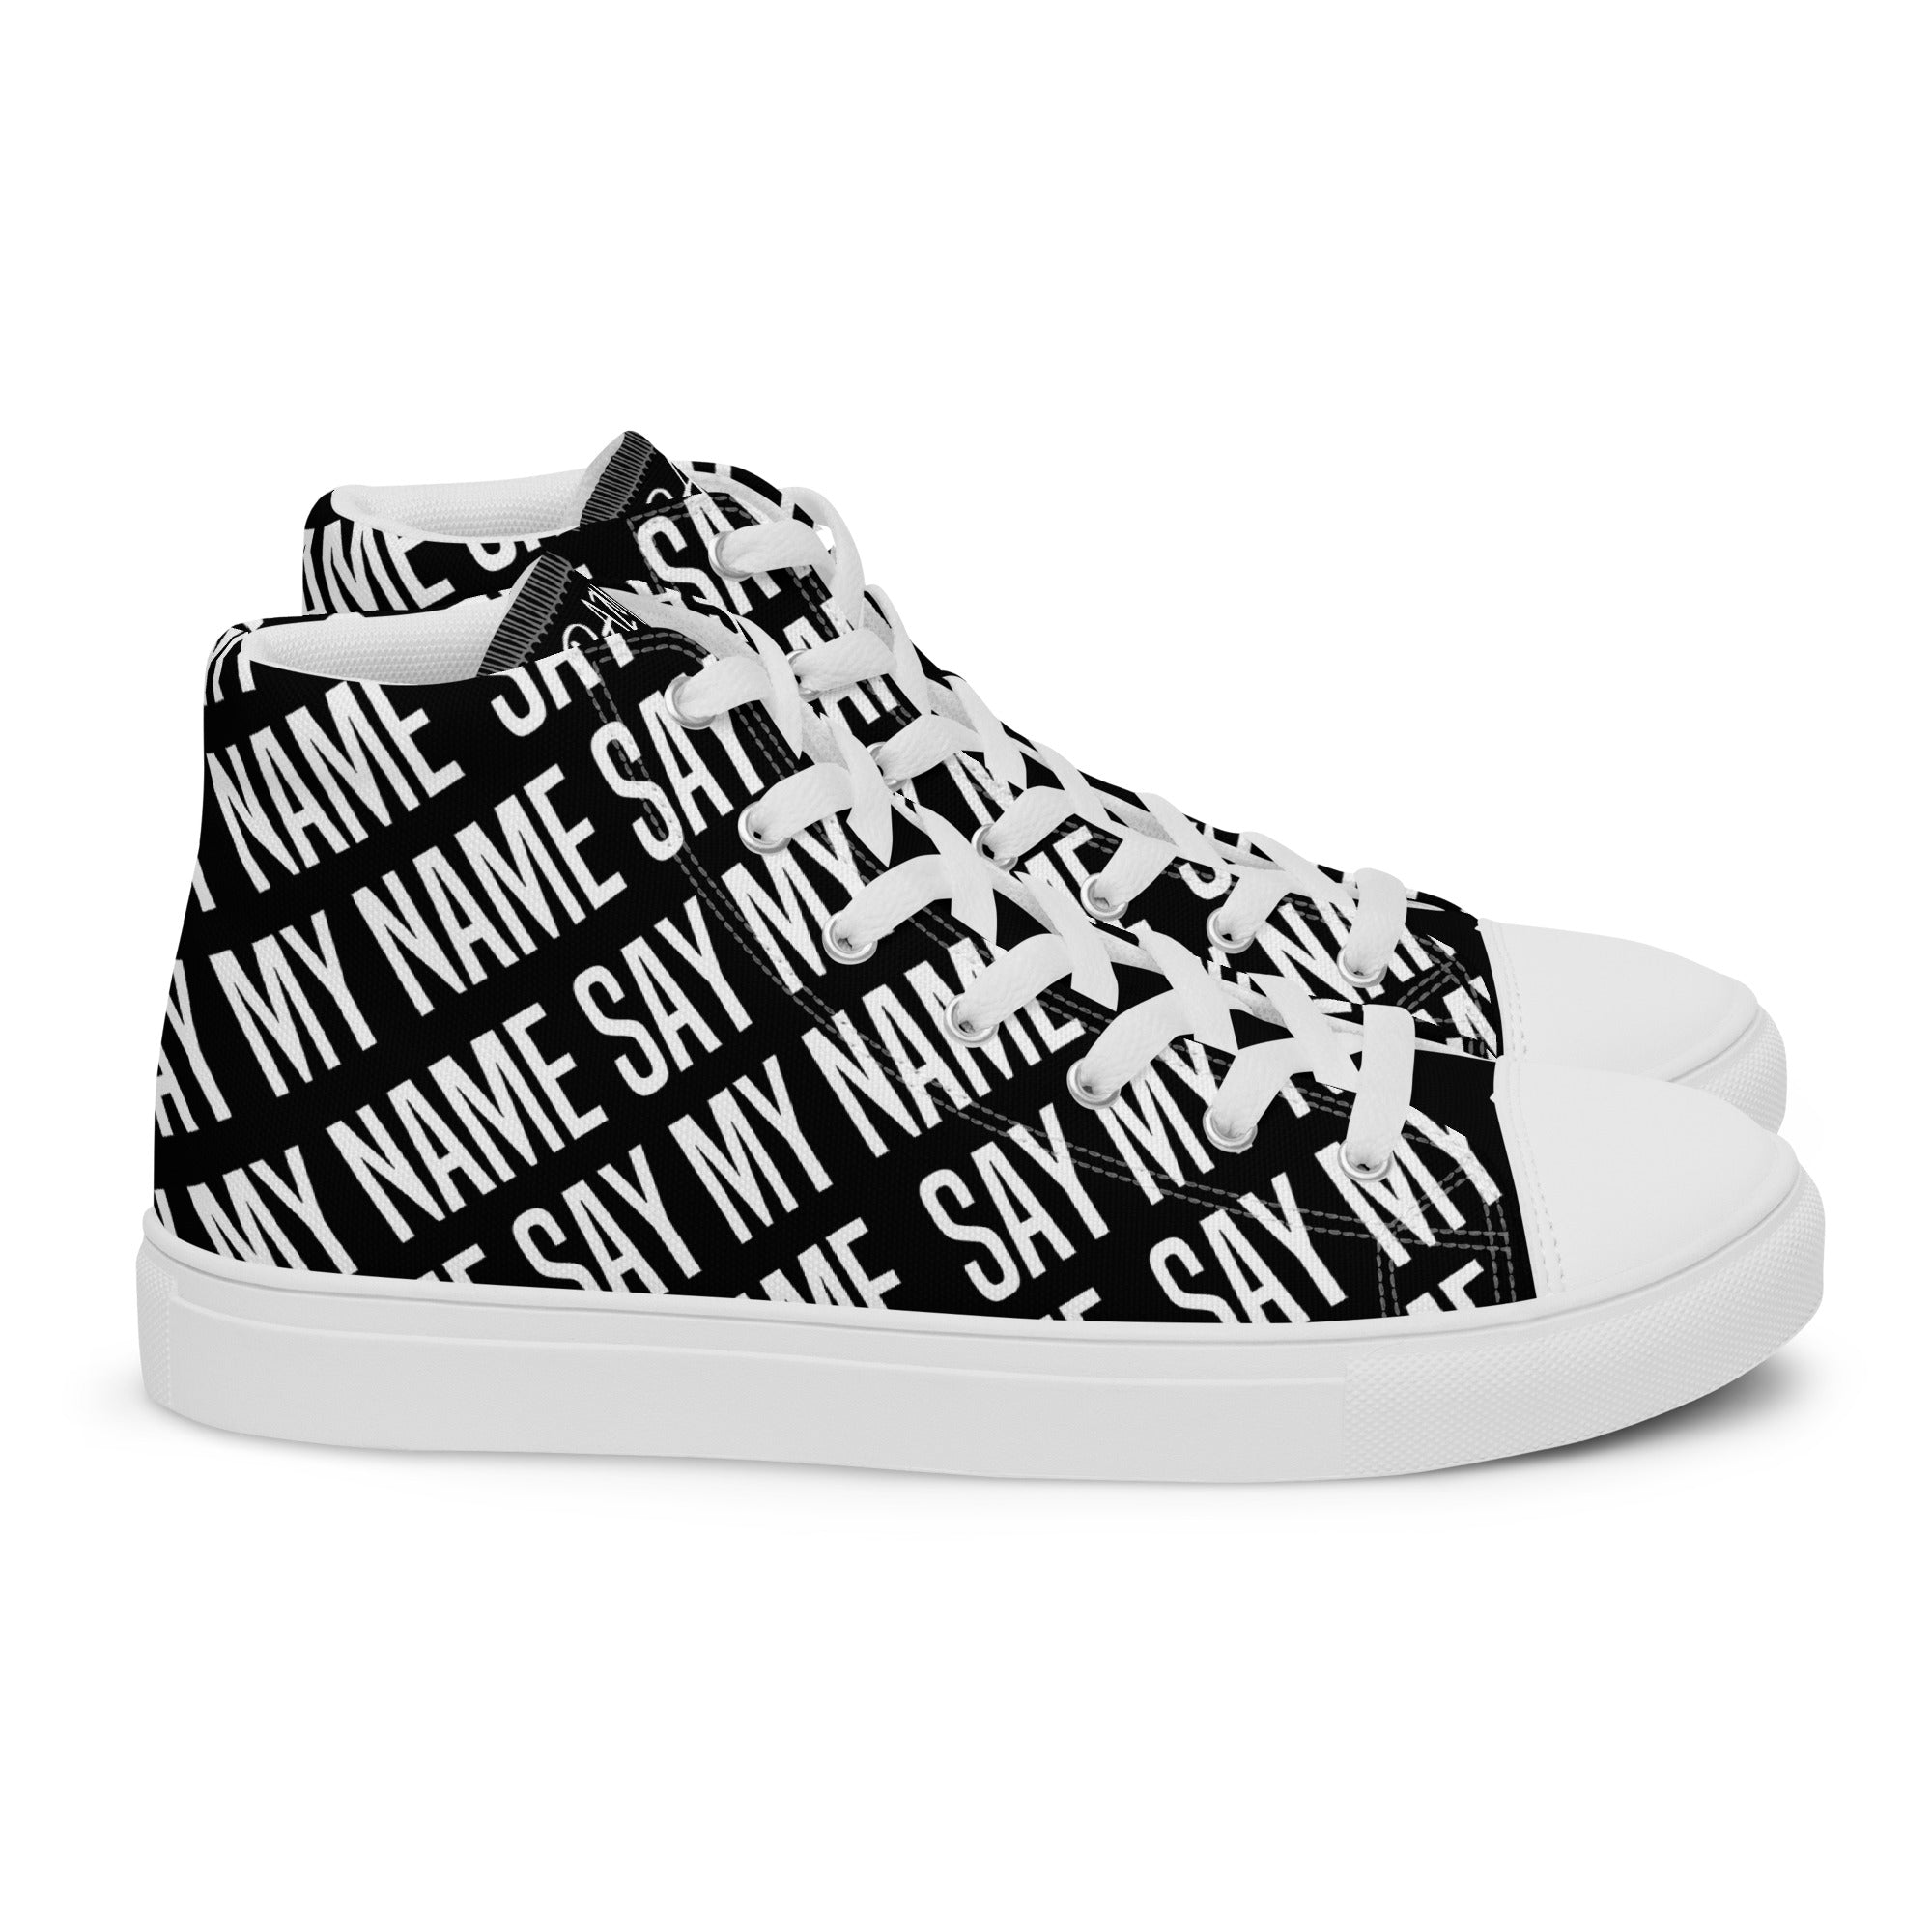 "SAY MY NAME" women's high black canvas sneakers multi